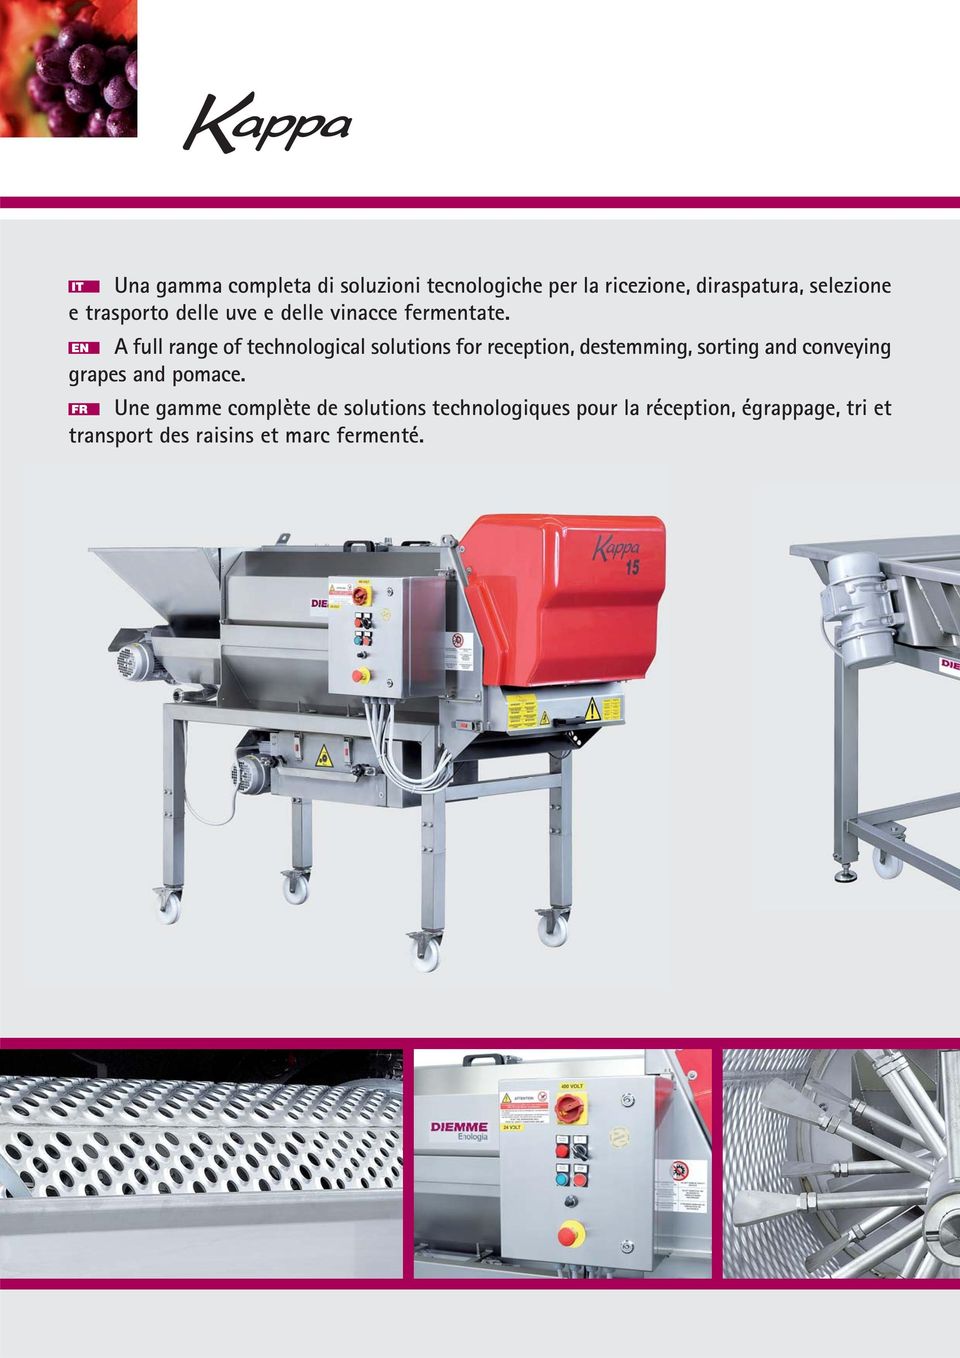 full range of technological solutions for reception, desteing, sorting and conveying